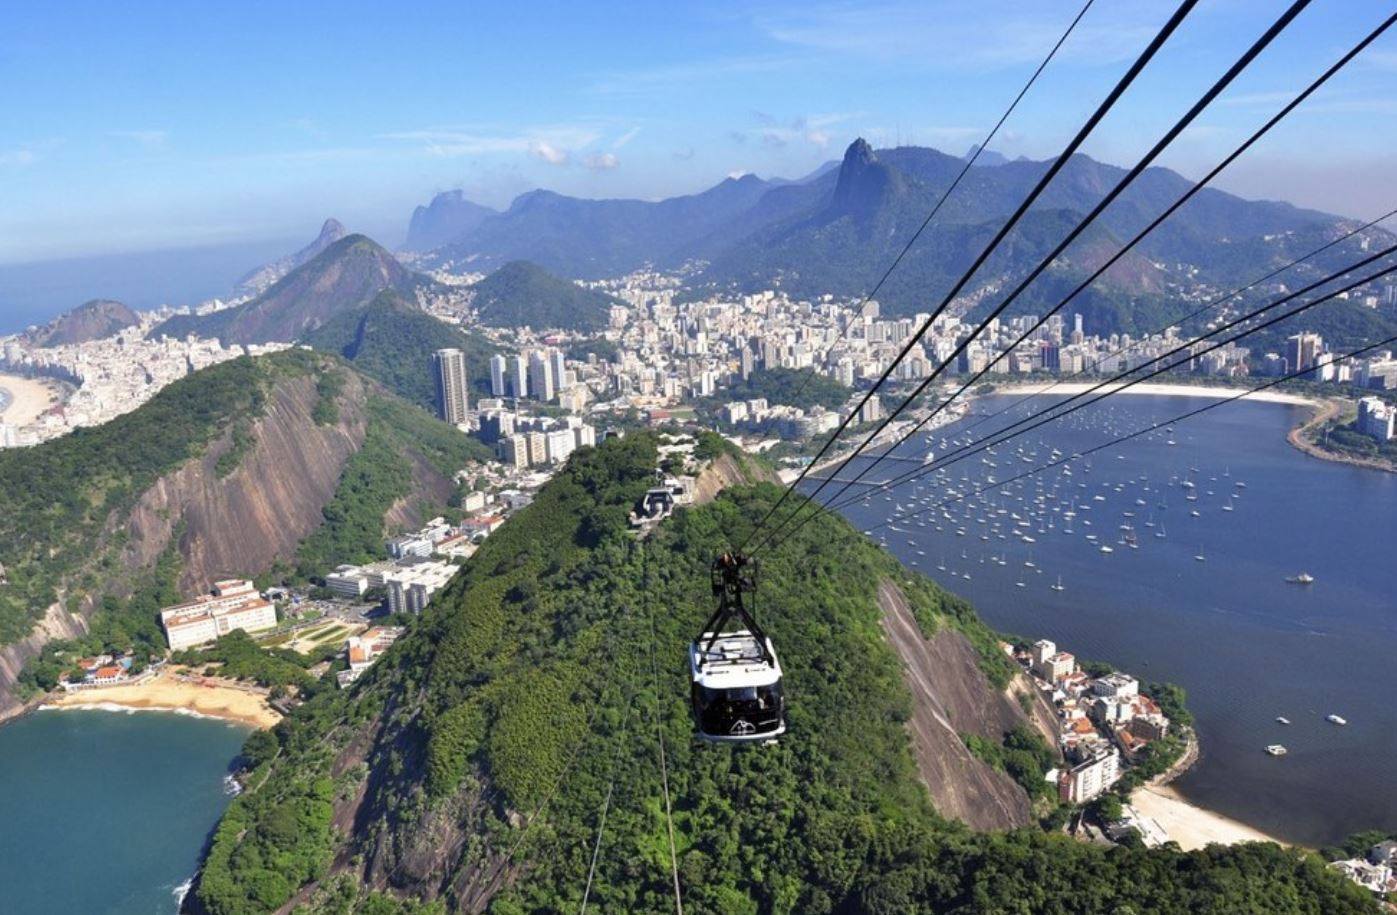 When Brazil hosts the G20 leaders’ summit in November, an organiser said, one objective would be to craft a final statement that is shorter and less controversial. Photo: Rio G20